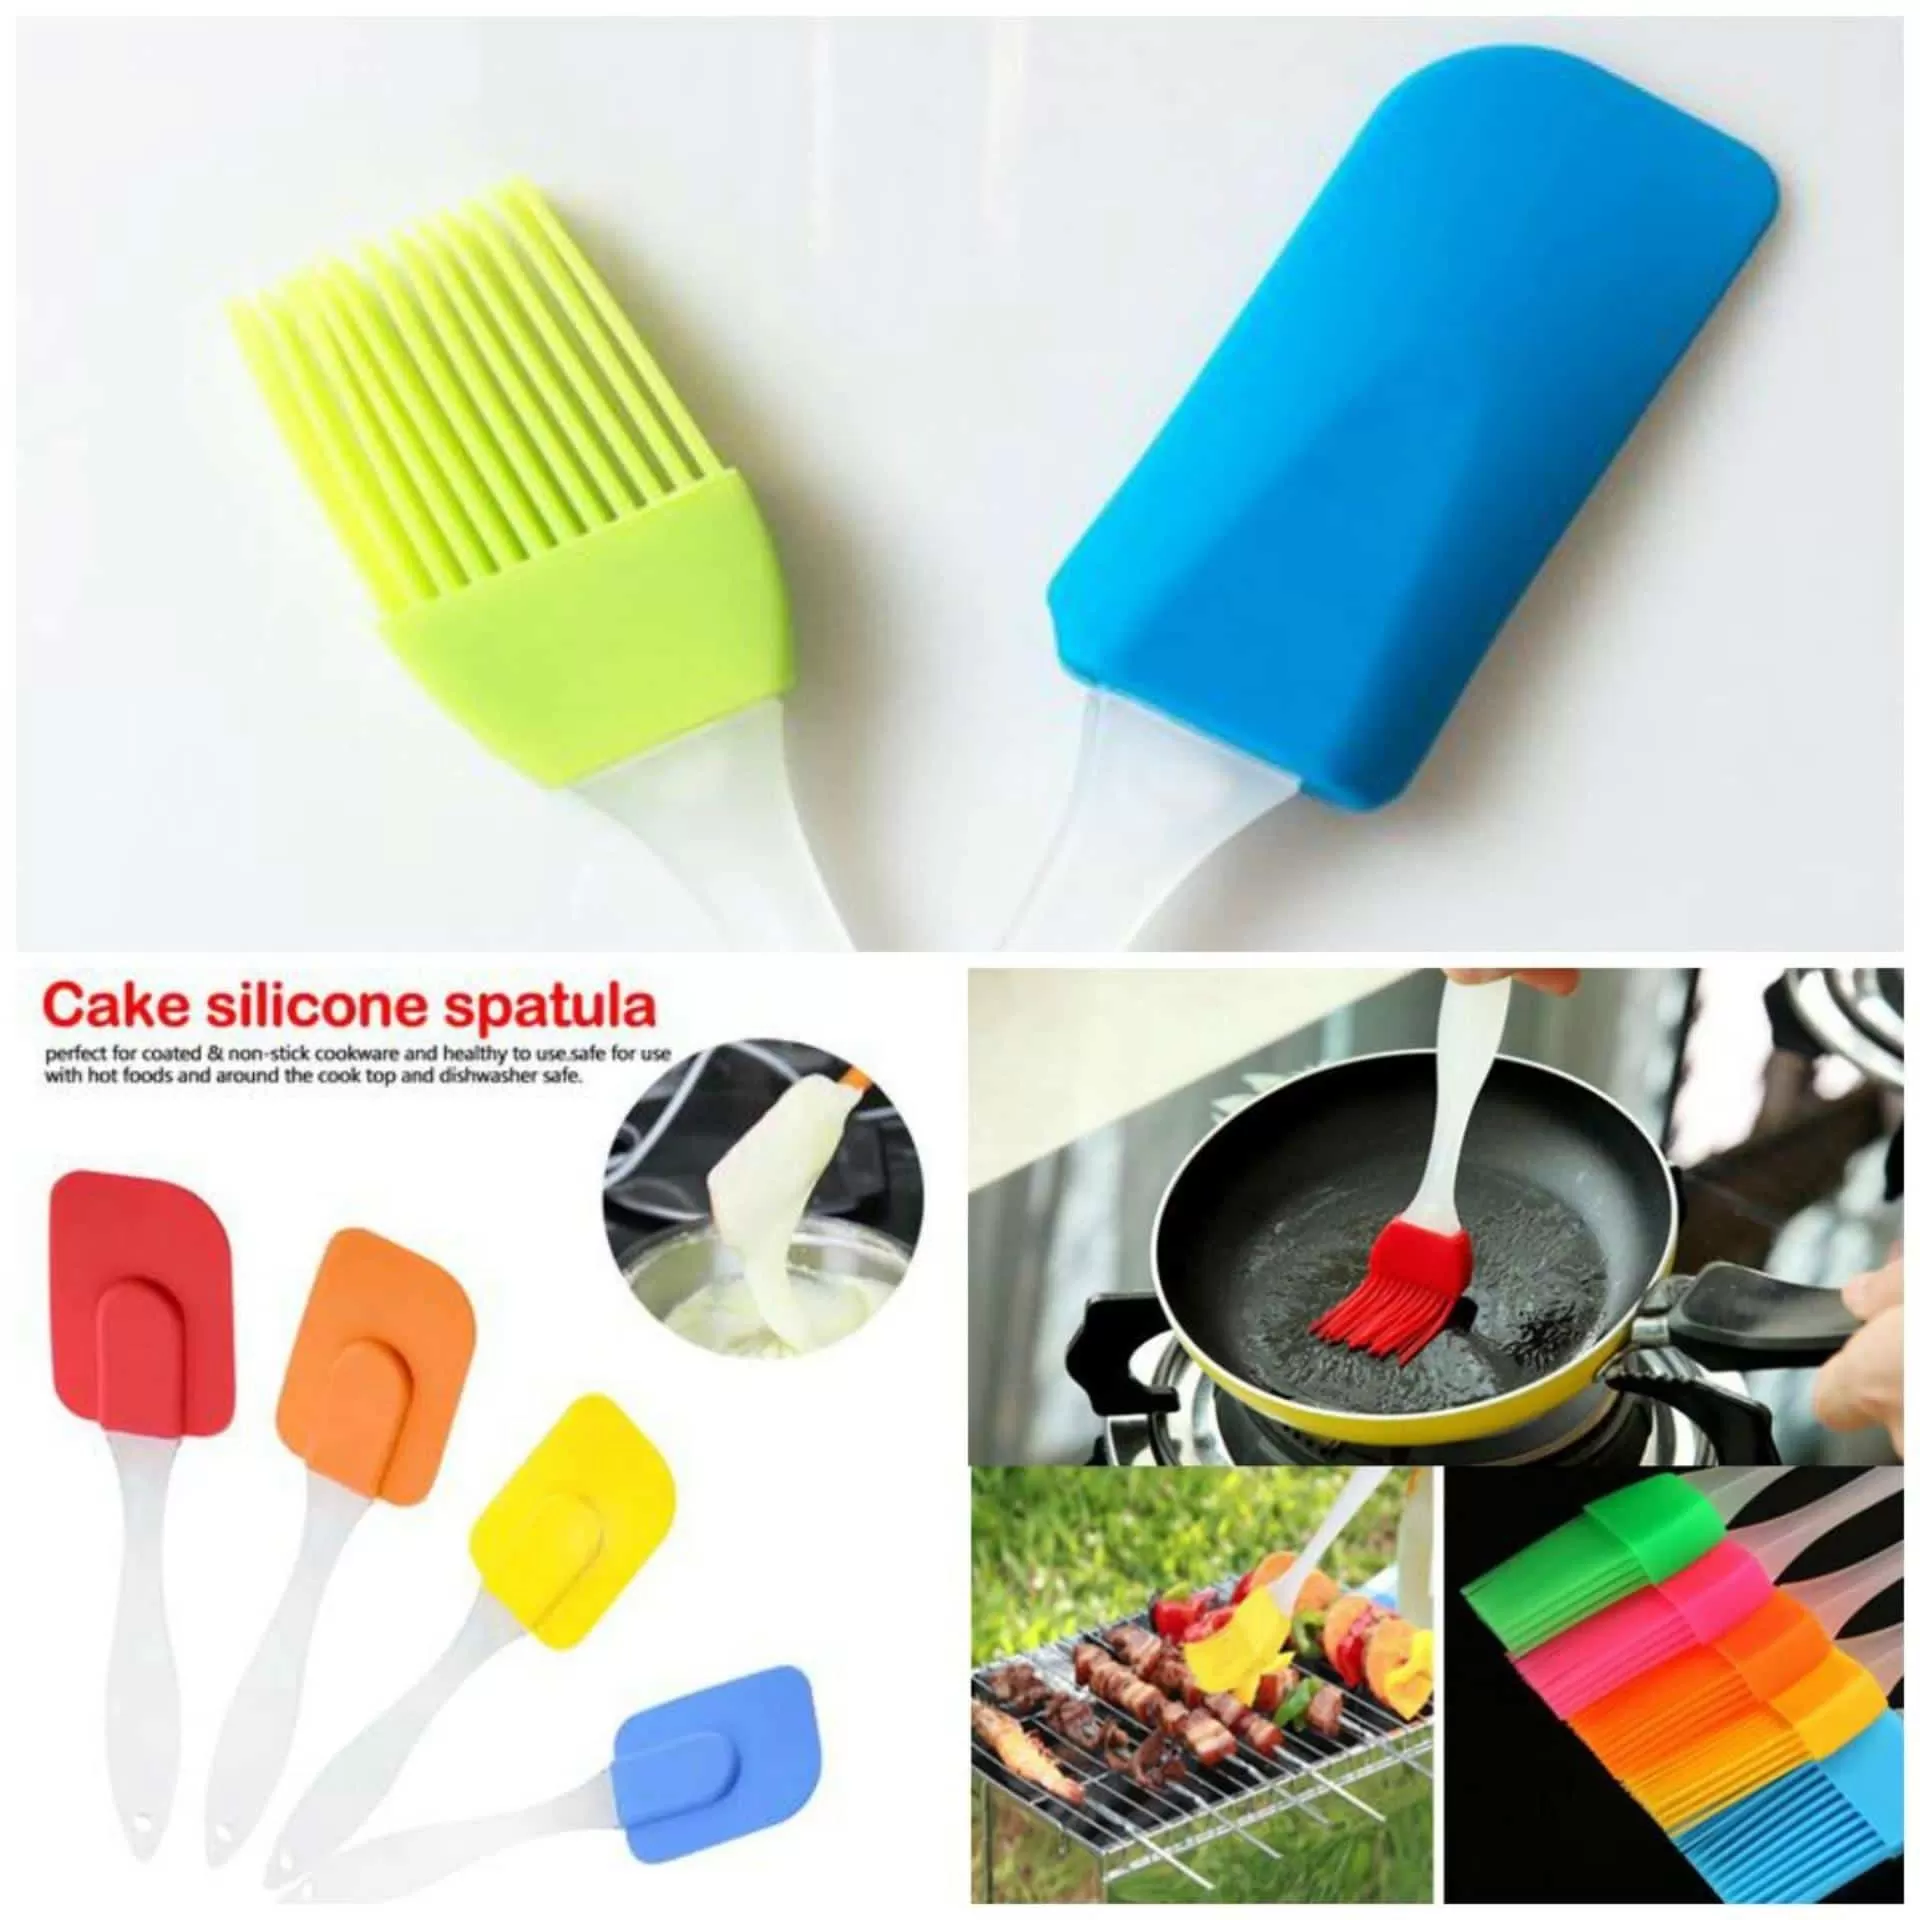 Pack of 2 - Spatula & BBQ Oil Brush , BBQ brush , High Heat Resistant with Transparent Handle For Cooking/Baking, Mini Small Size , Silicone Brush and